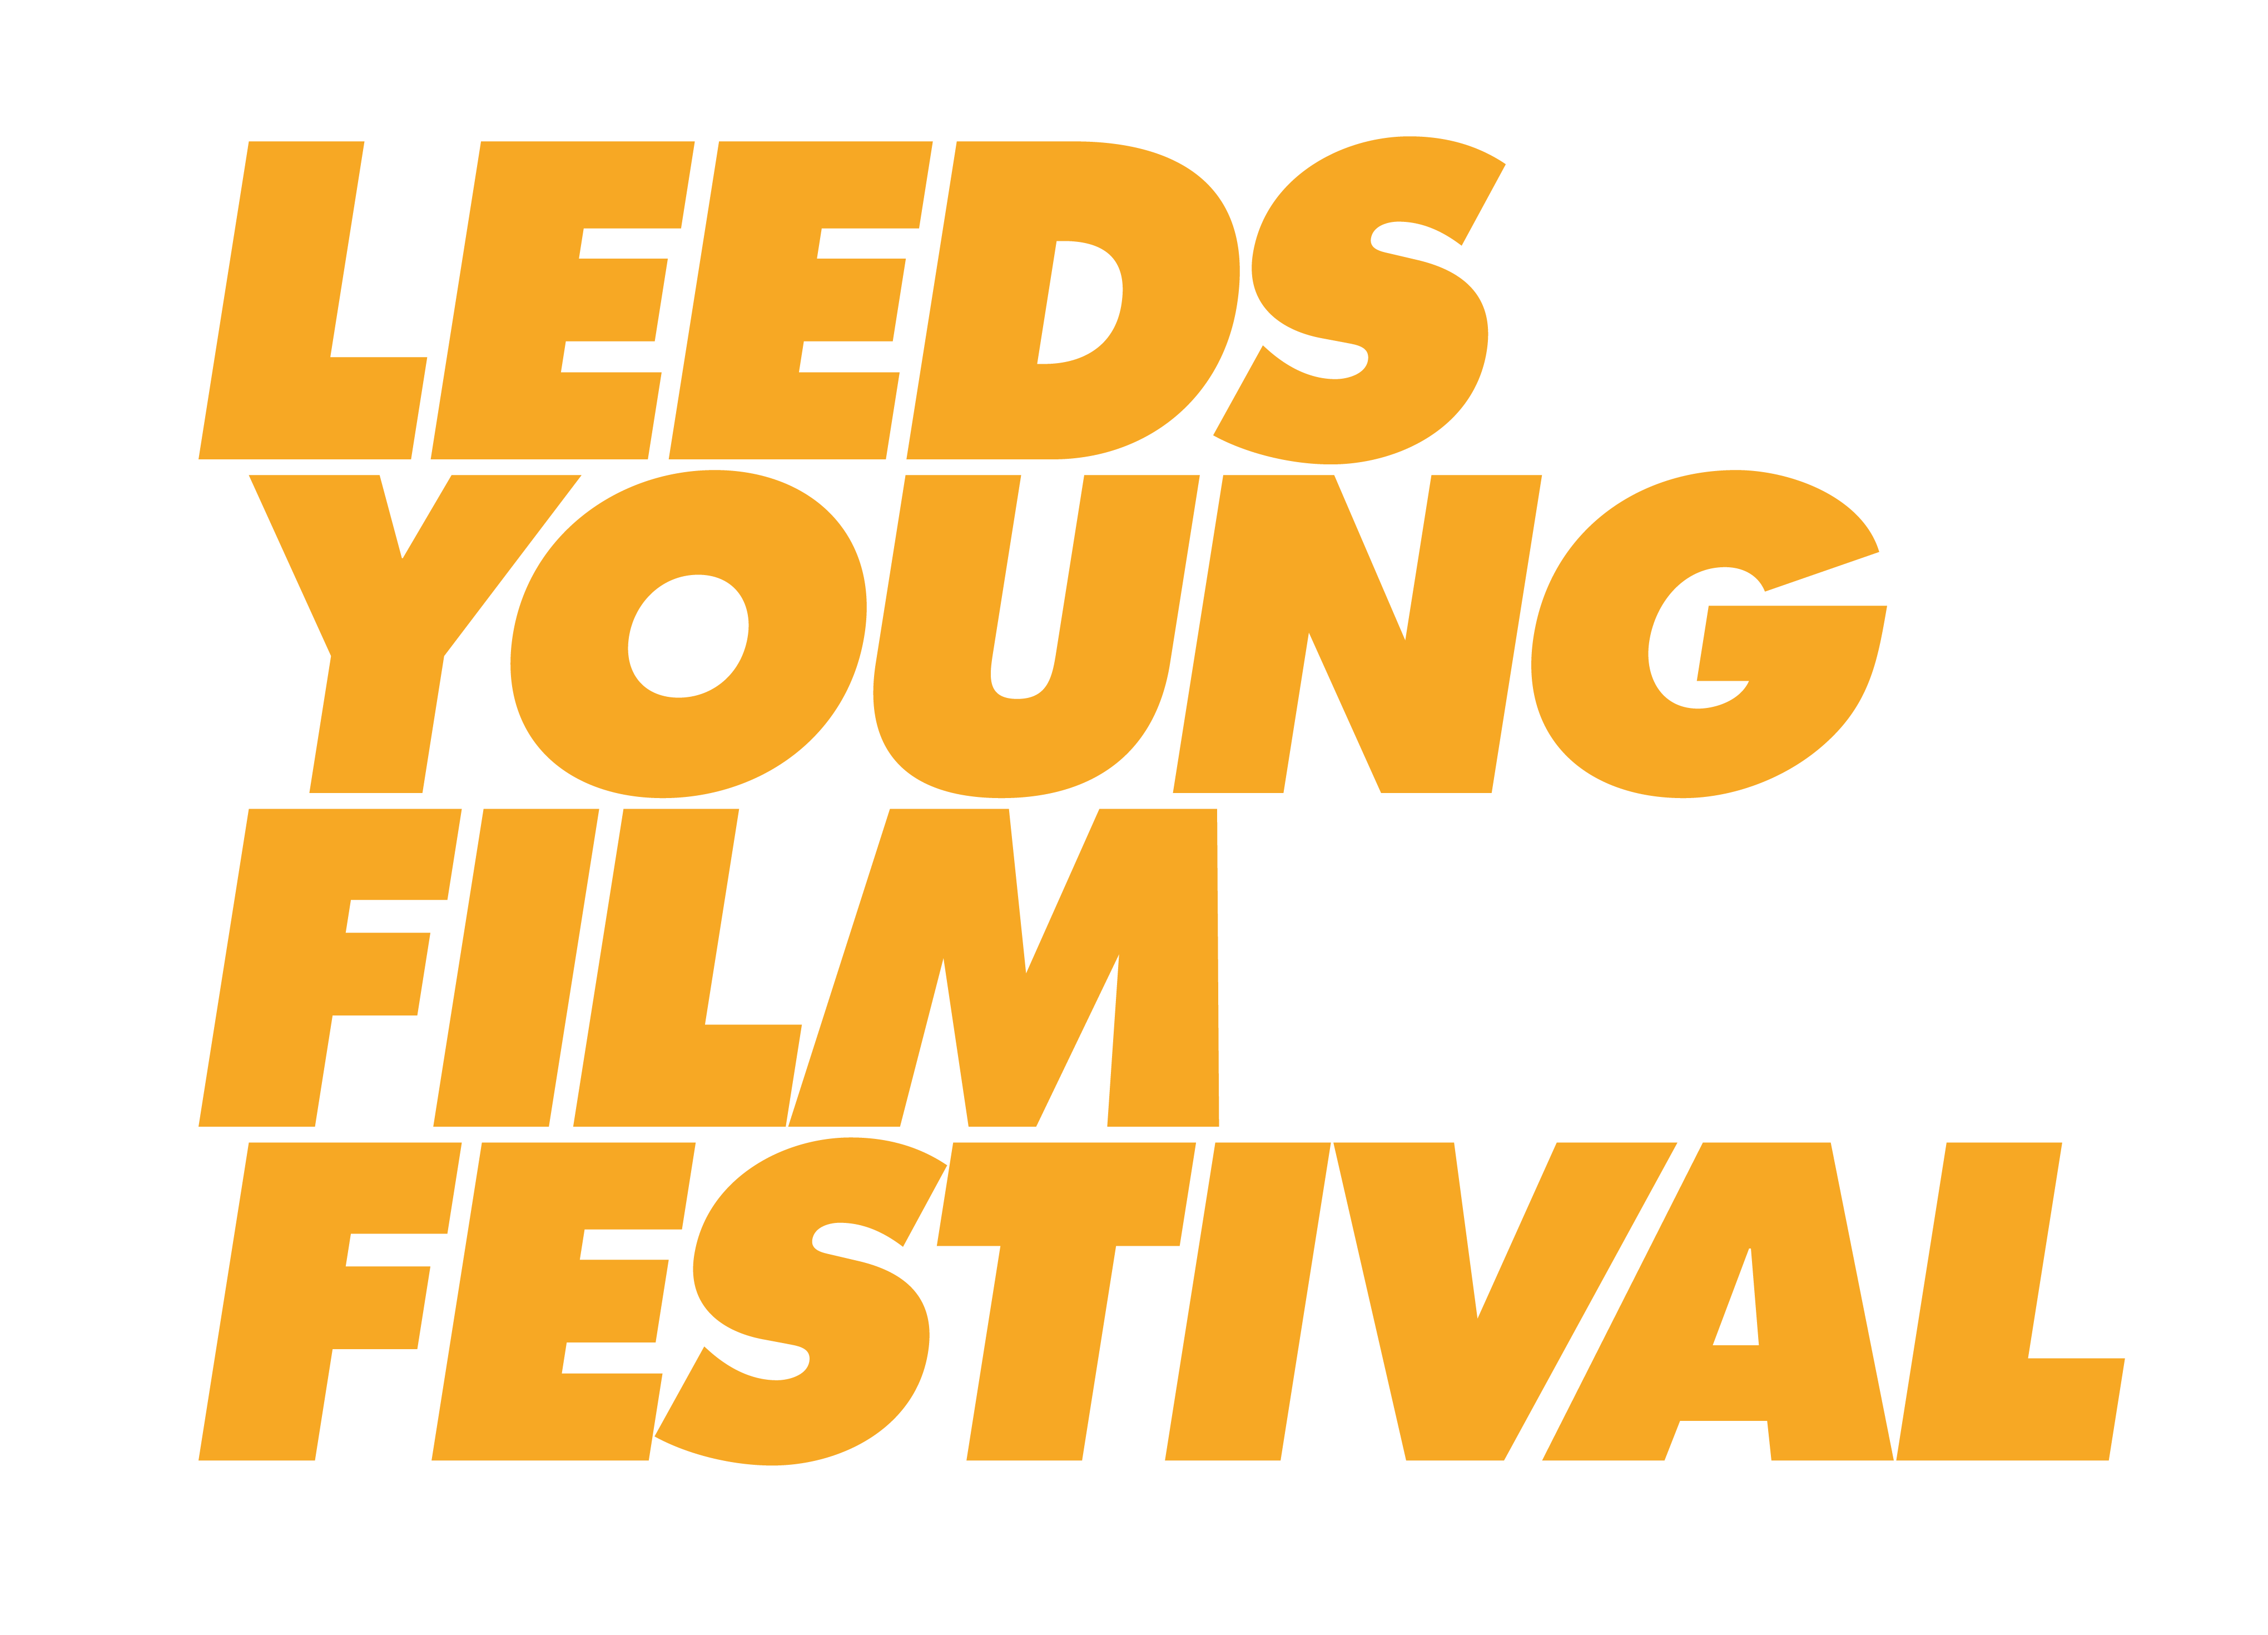 Leeds Young Film Festival